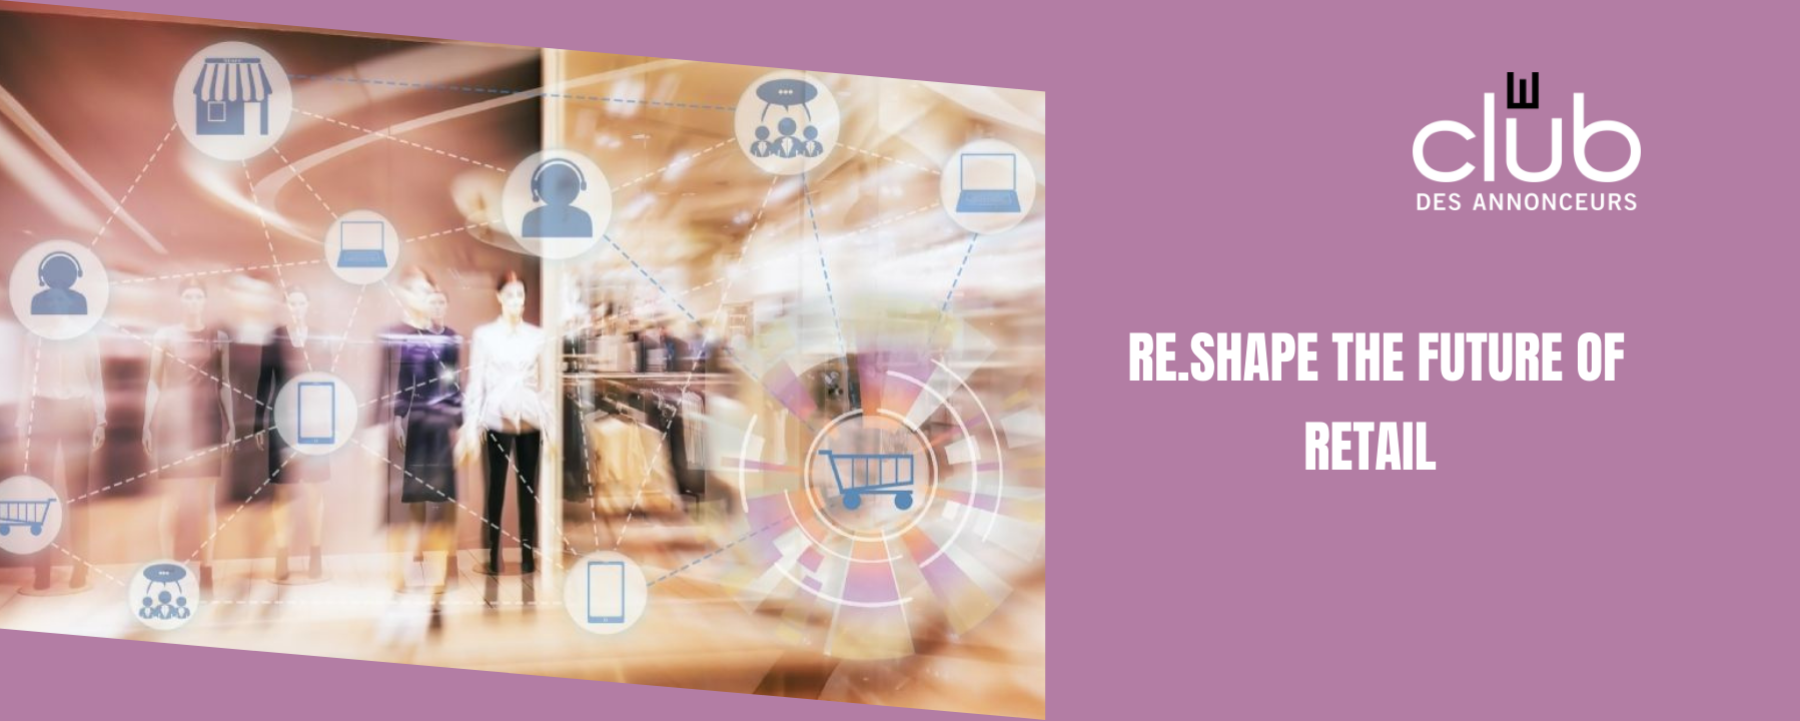 Re.Shape The Future of Retail